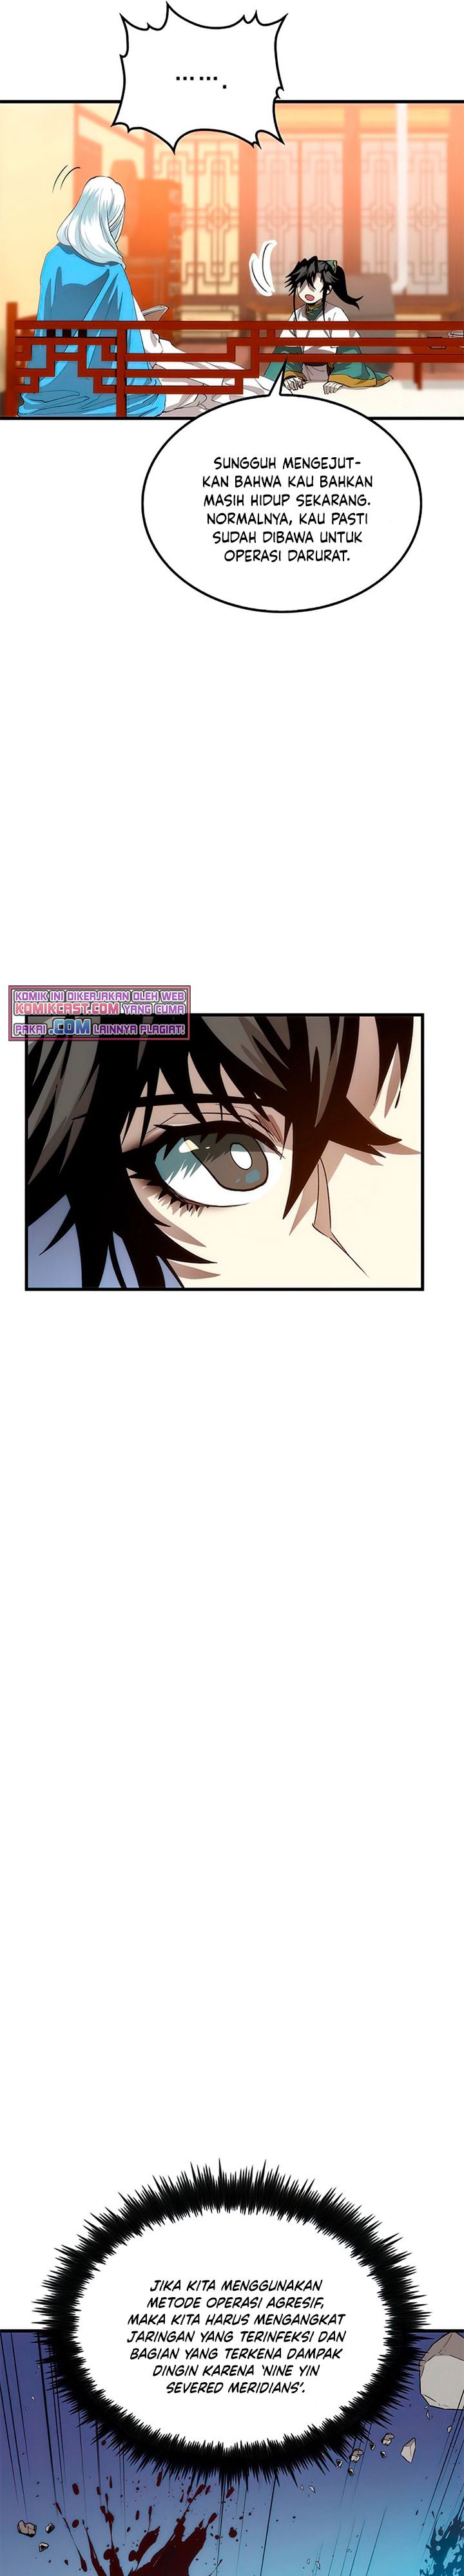 Doctor’s Rebirth Chapter 58